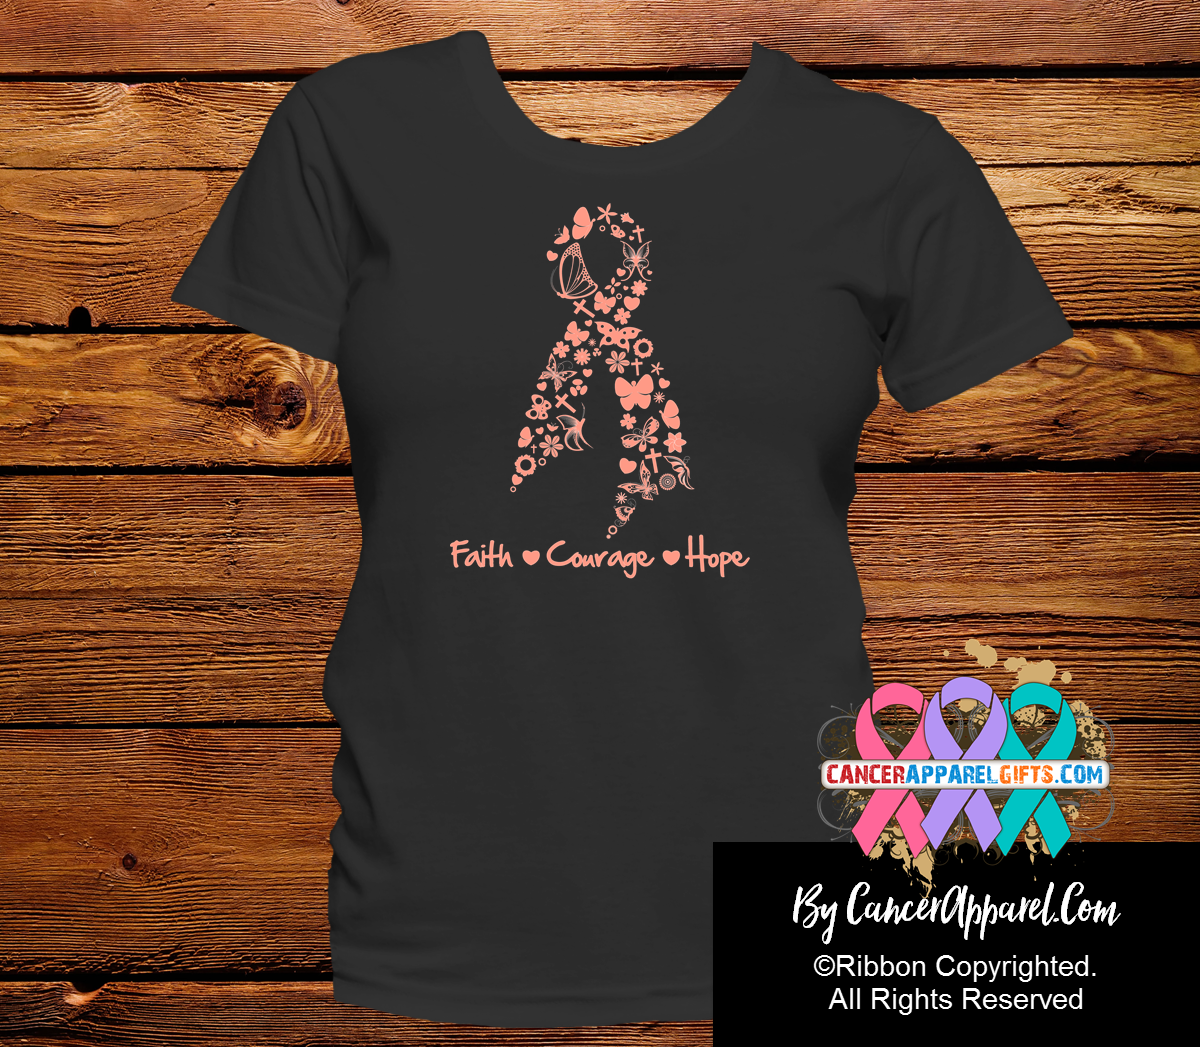 Uterine Cancer Faith Courage Hope Shirts - Cancer Apparel and Gifts